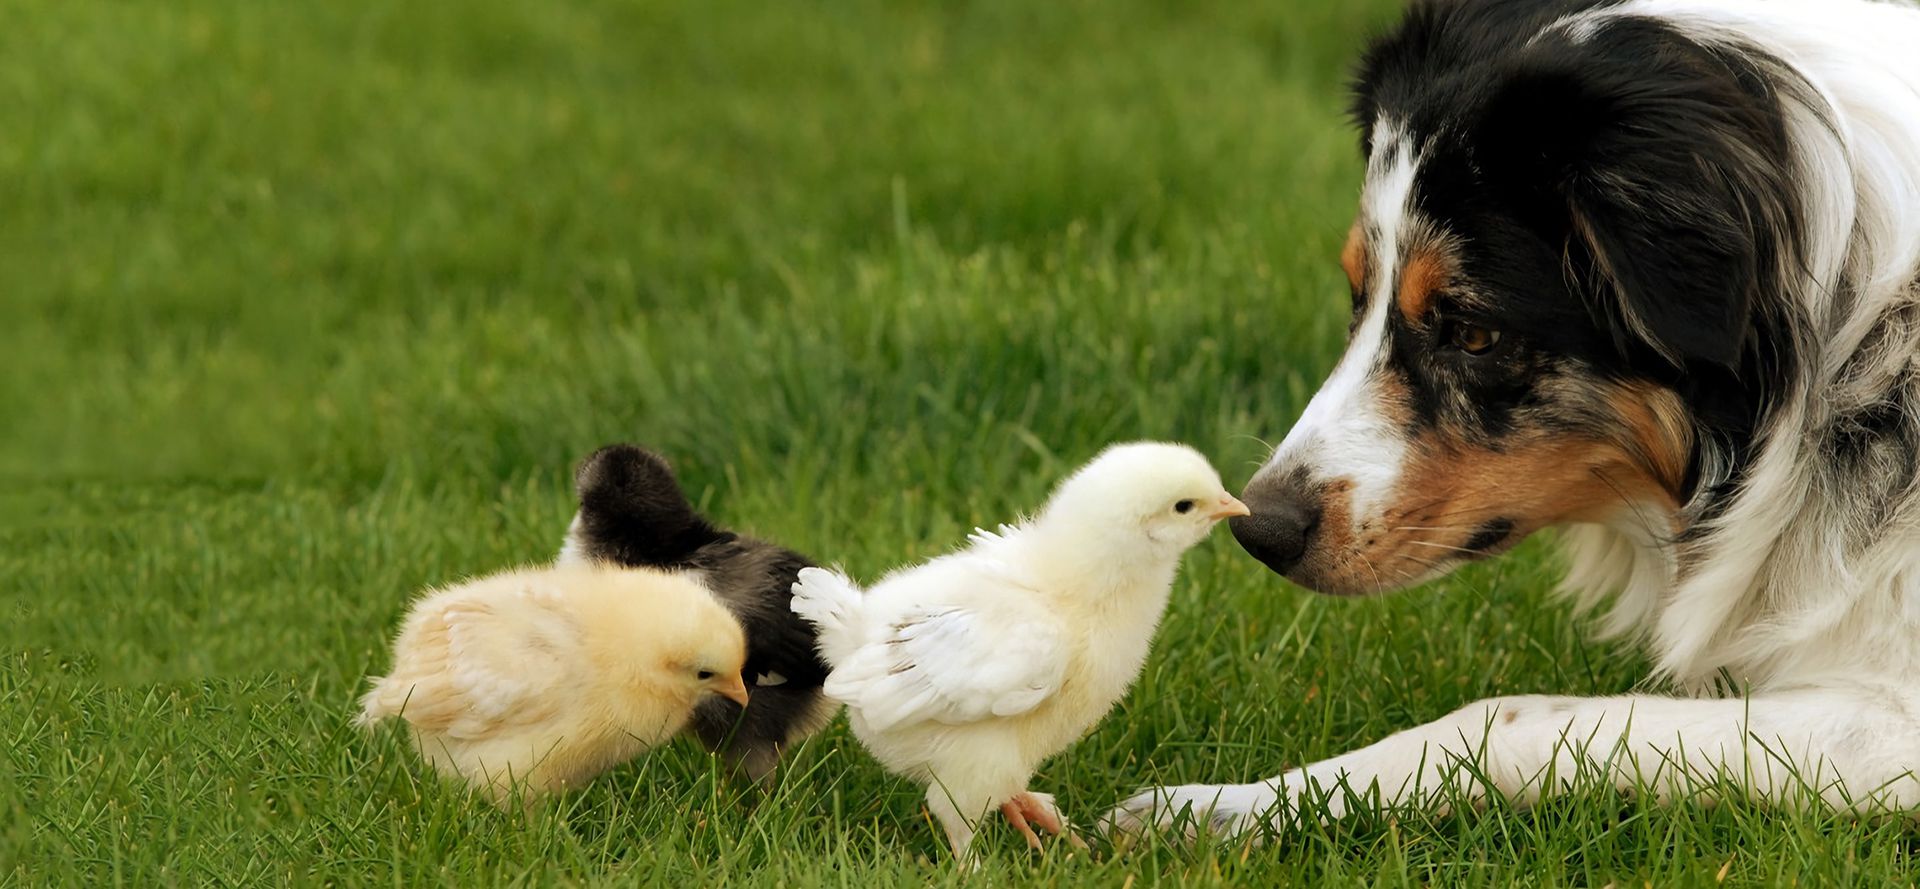 Dog with chickens.